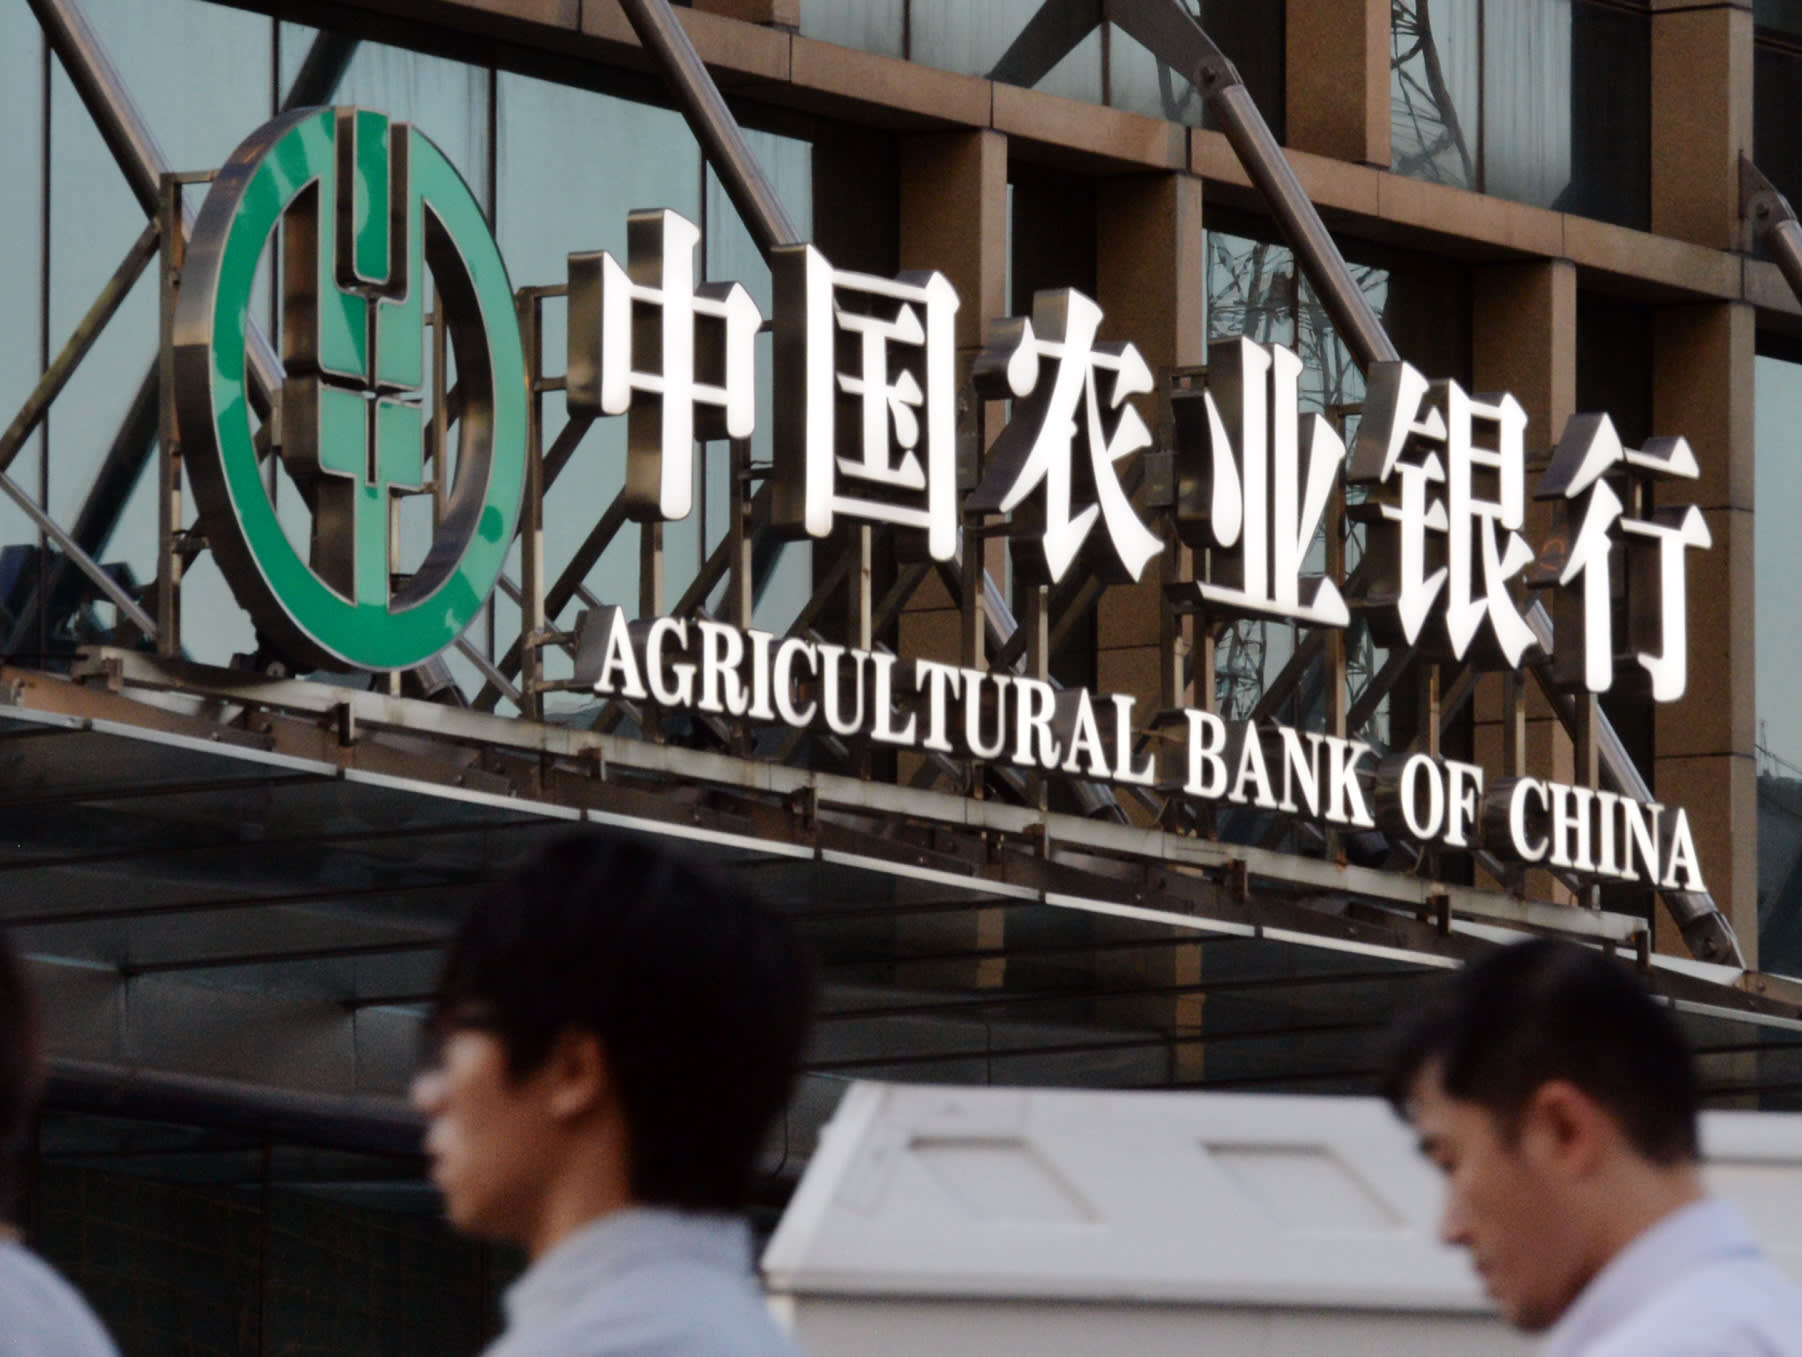 The First Blockchain Loan In The Amount Of $ 300,000 Is Issued By The Agricultural Bank Of China